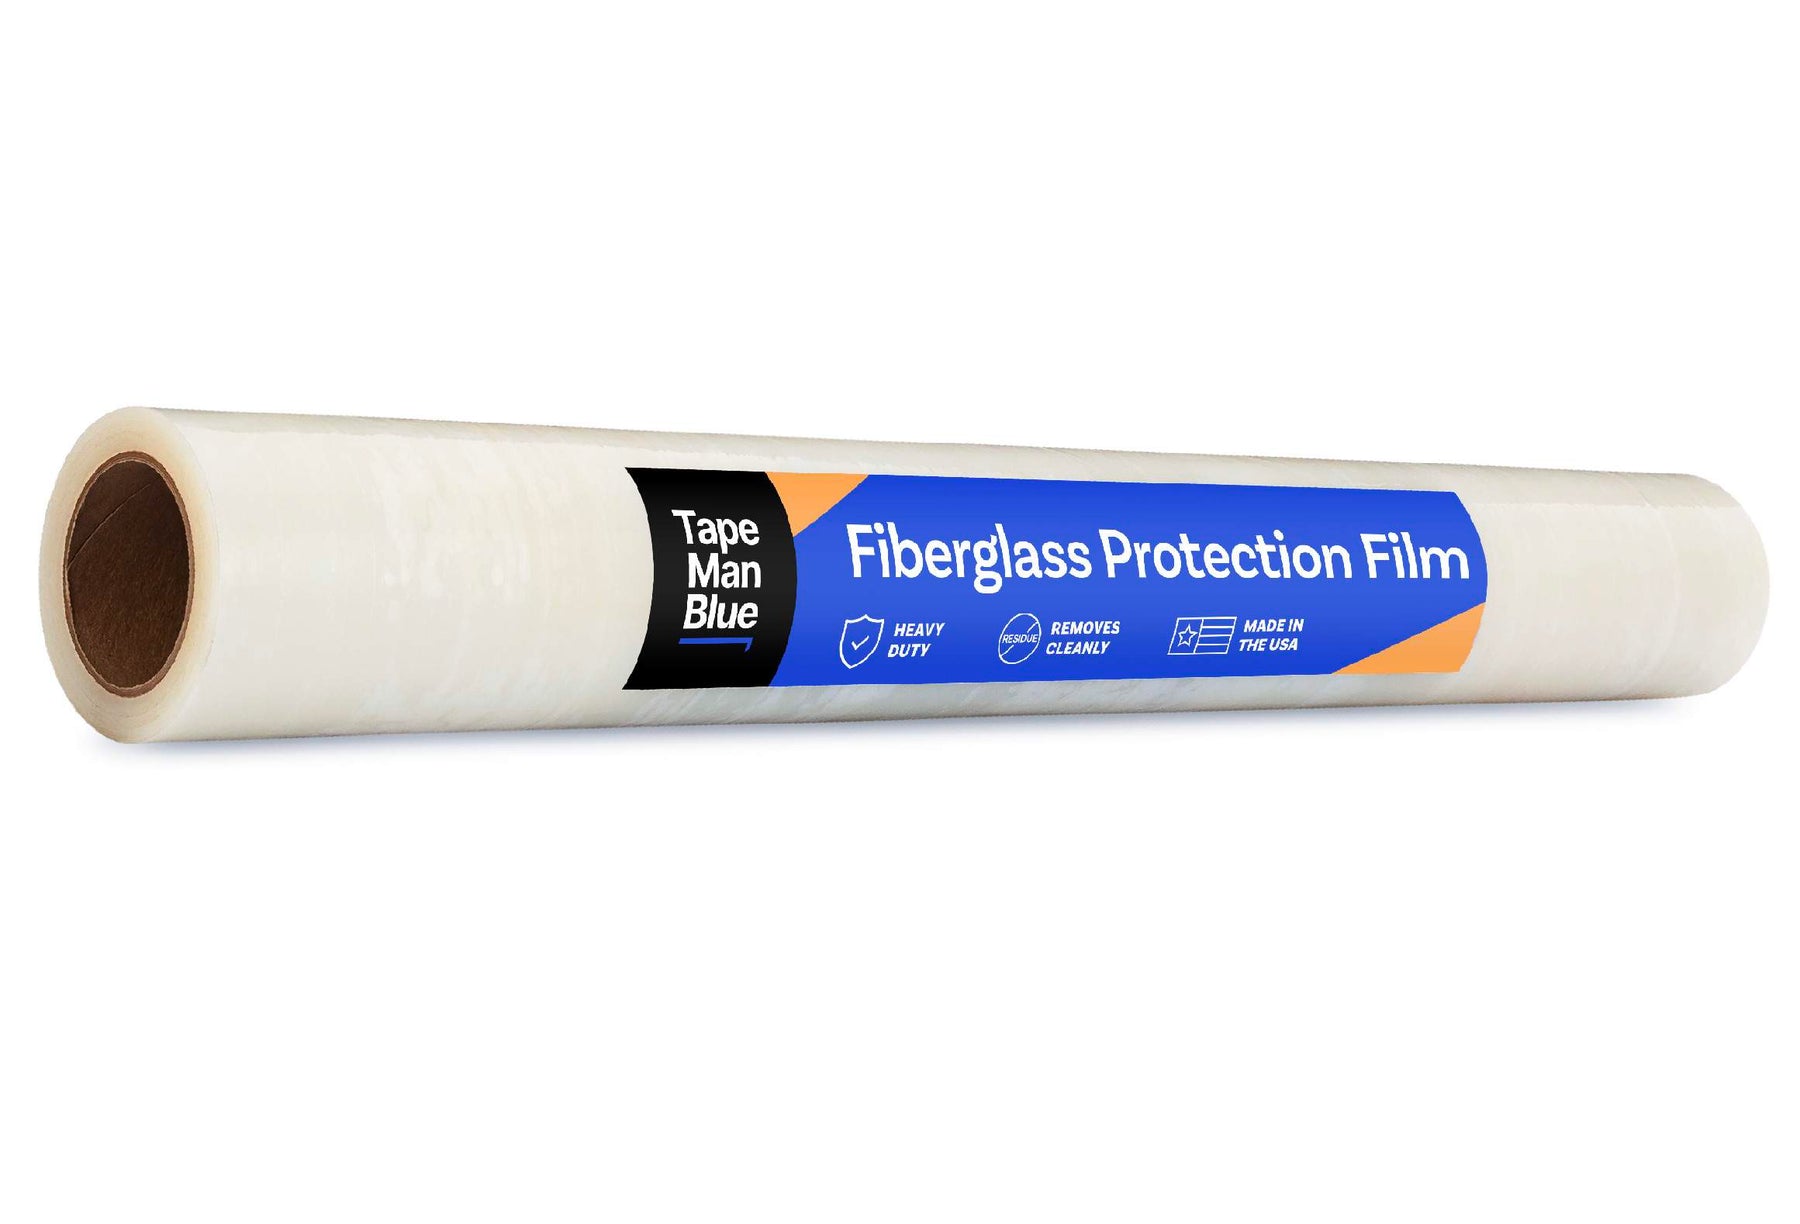 TapeManBlue Stainless Steel Protection Film, 24 inch x 200 feet